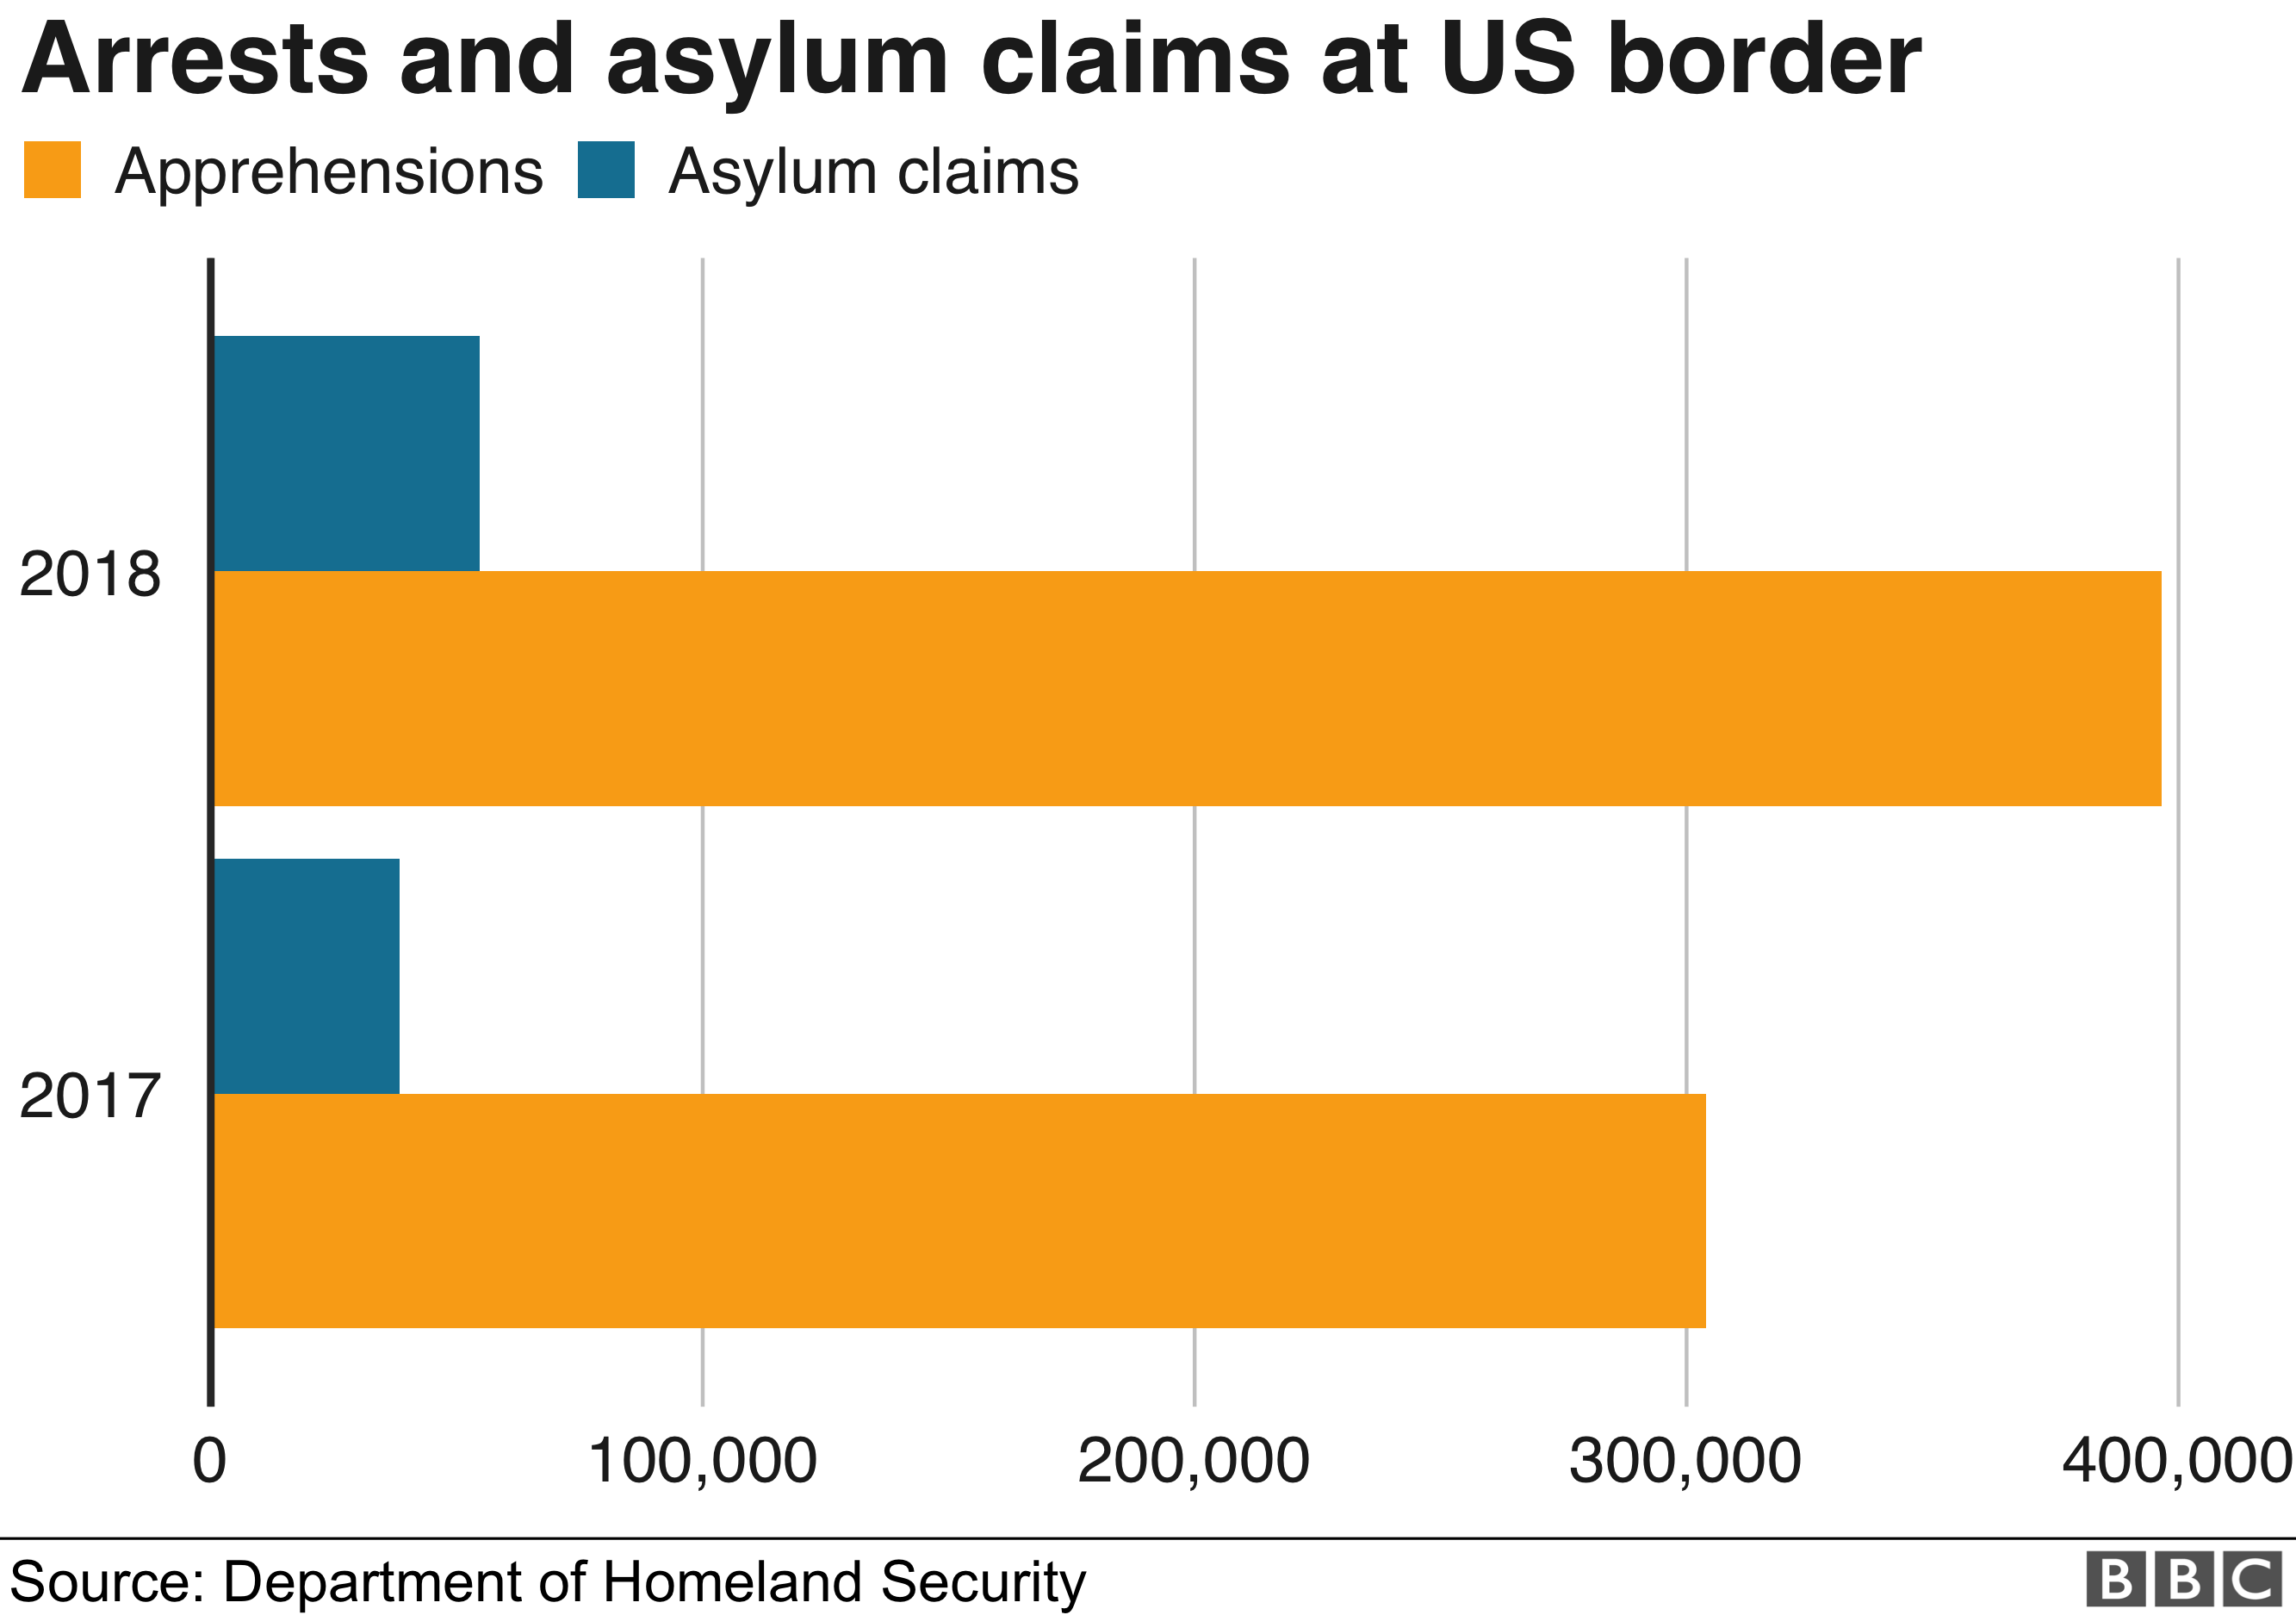 Chart showing US border arrests and asylum claims in 2017 and 2018